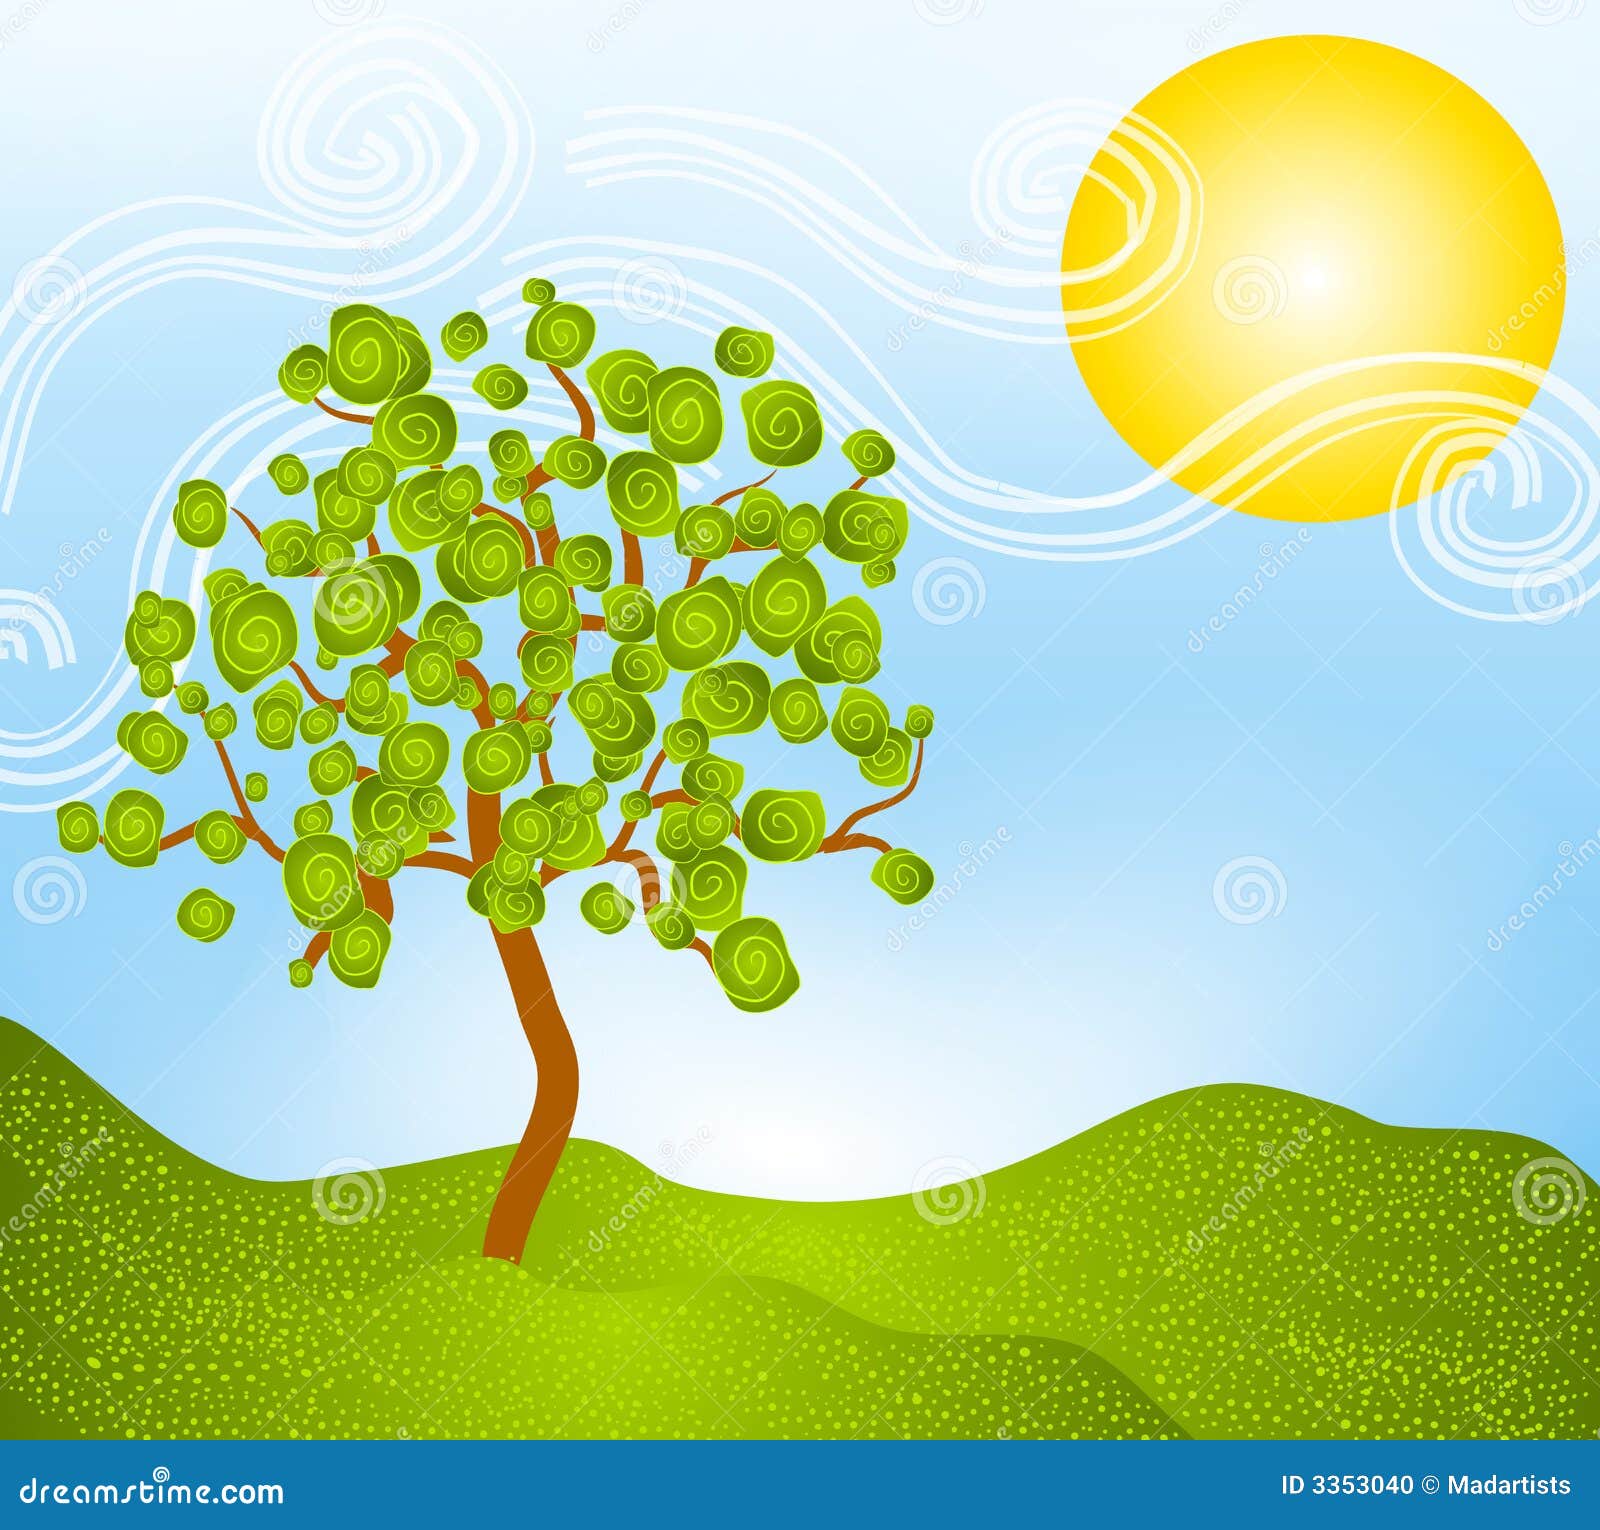 spring nature clipart - photo #36